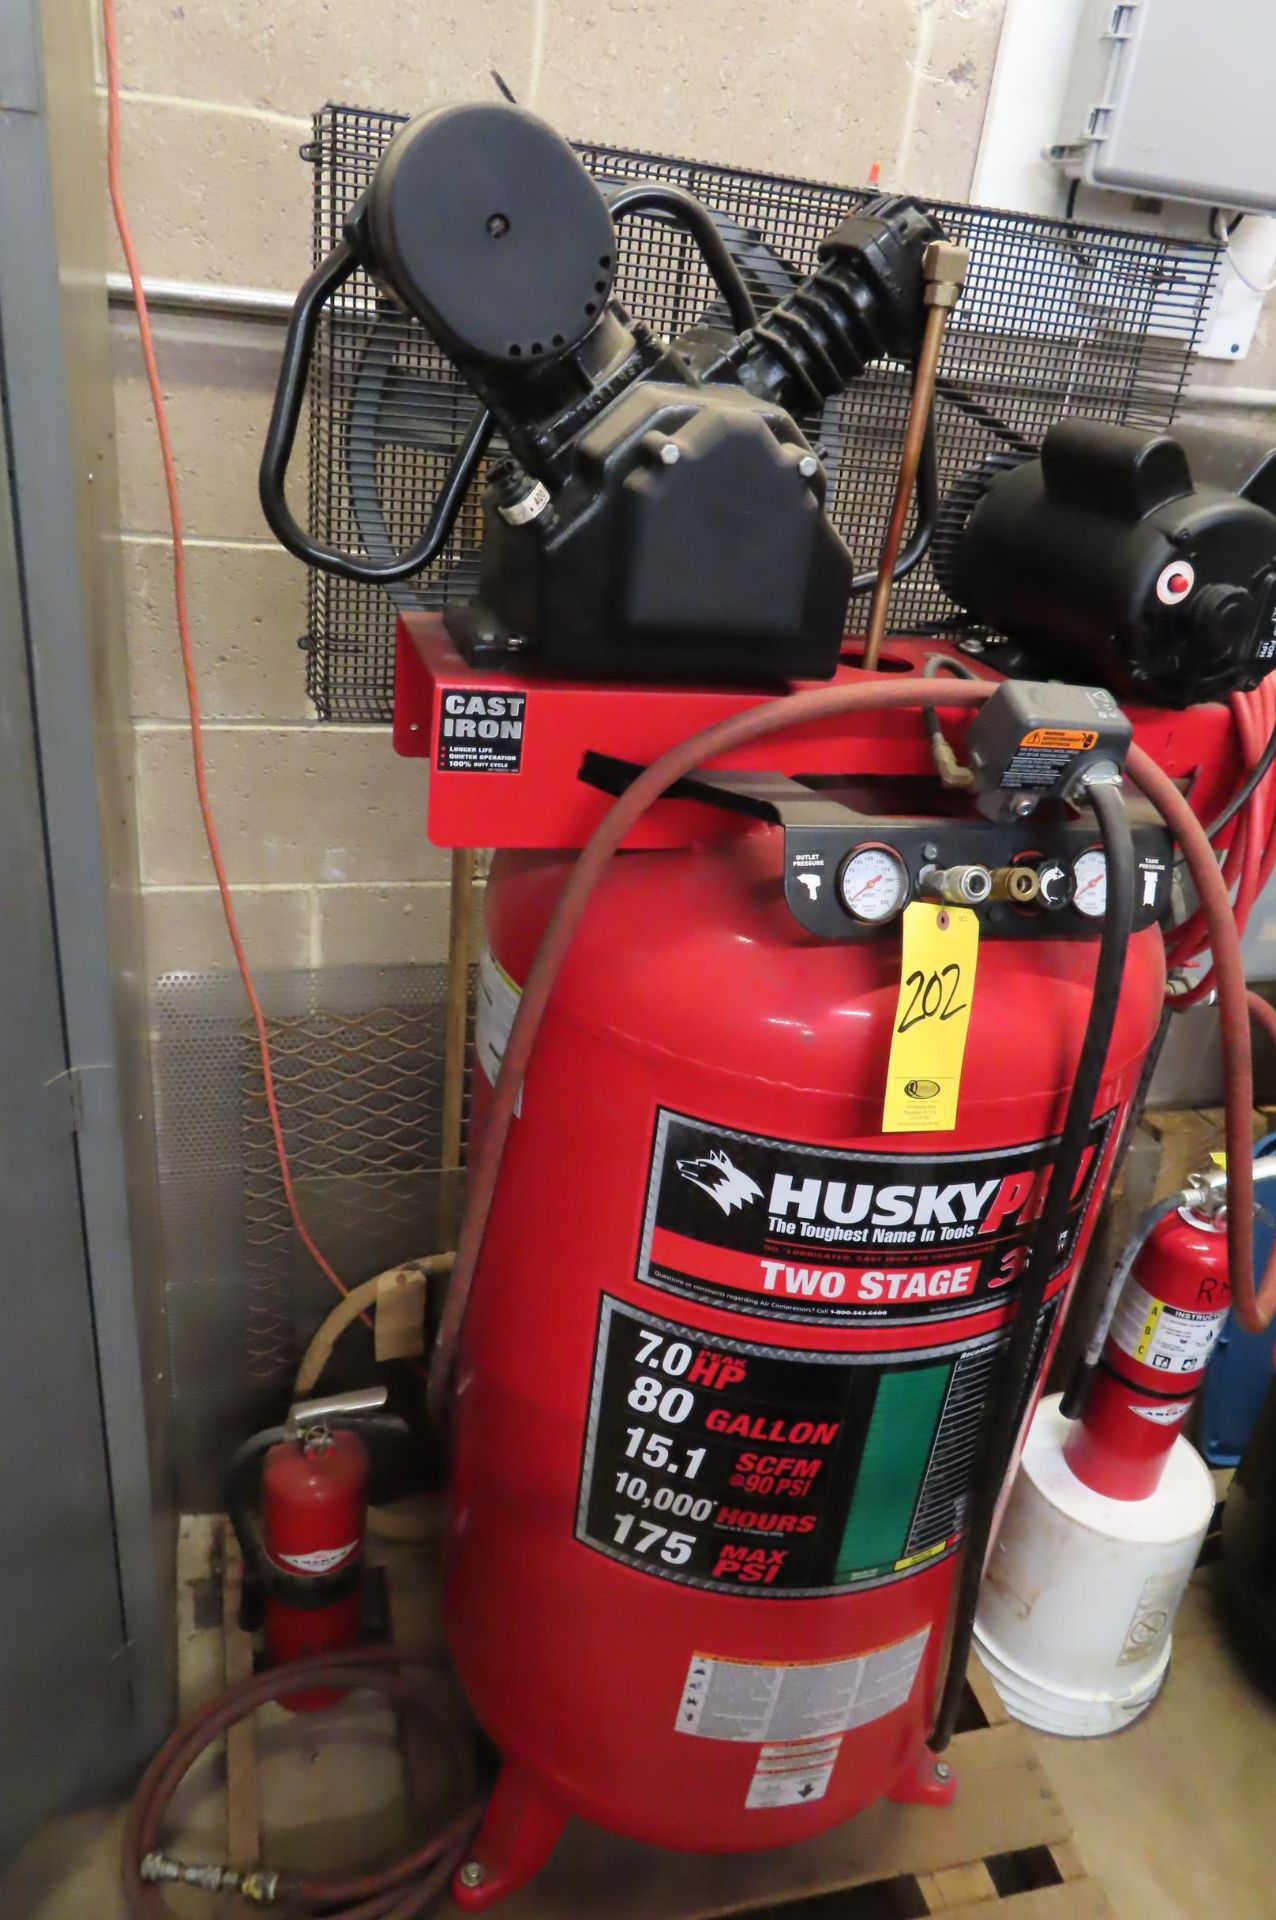 HUSKY PRO TWO-STAGE UPRIGHT AIR COMPRESSOR, 7.0 HP, 80-GAL. TANK, 15.1 SCFM, 175 MAX PSI (VERY CLEAN